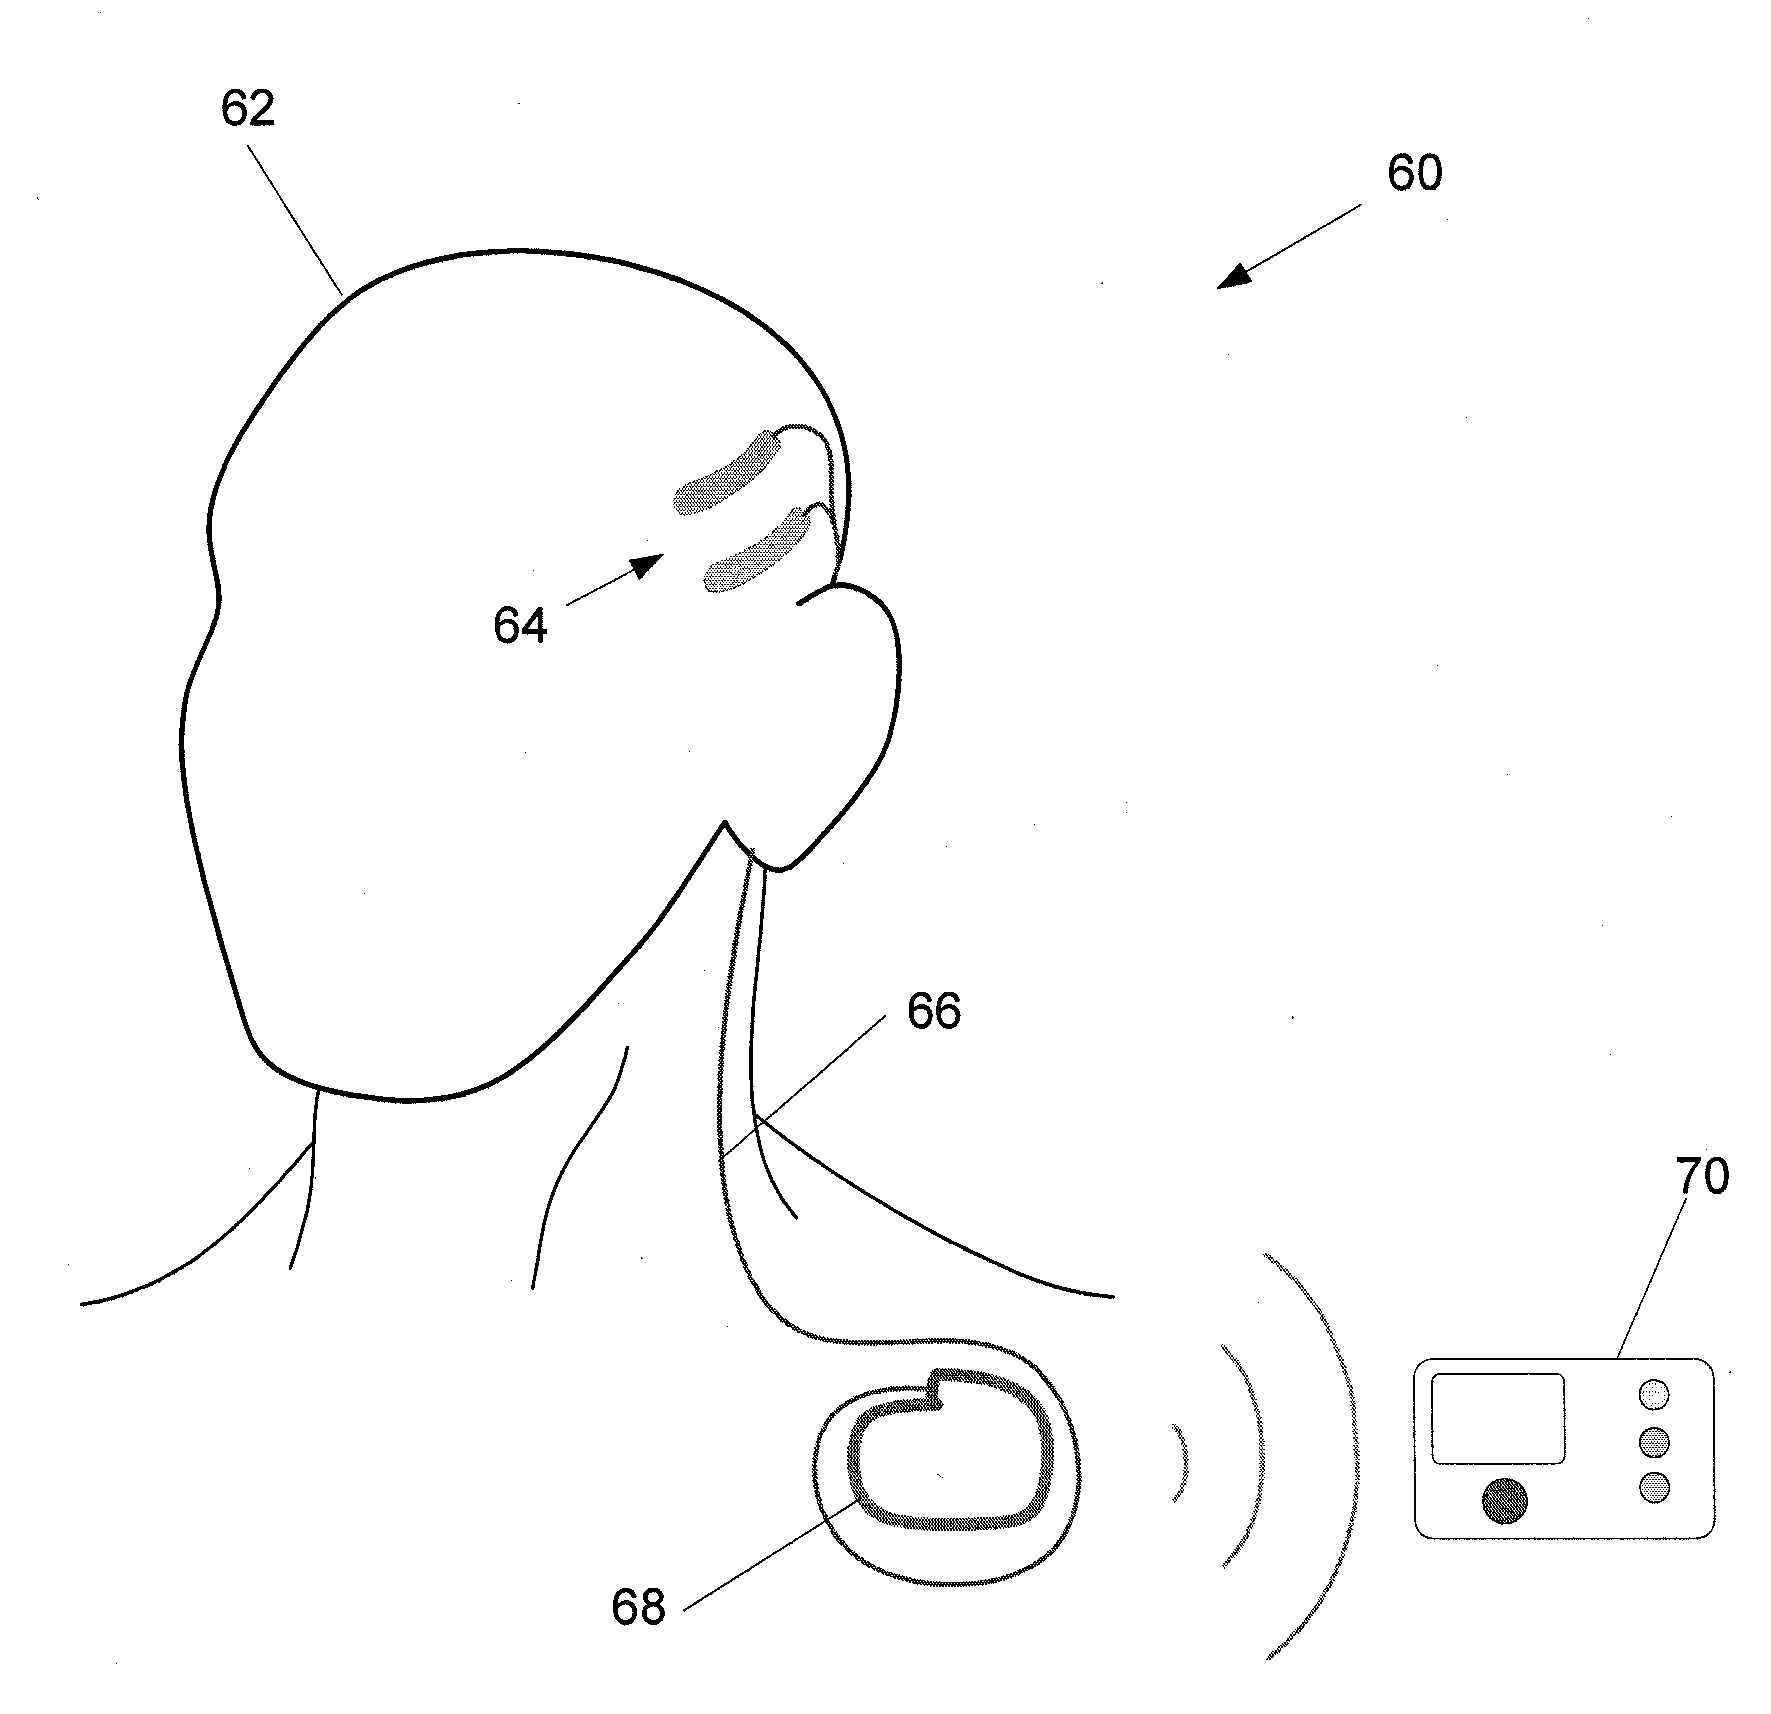 Systems and Methods for Identifying a Contra-ictal Condition in a Subject